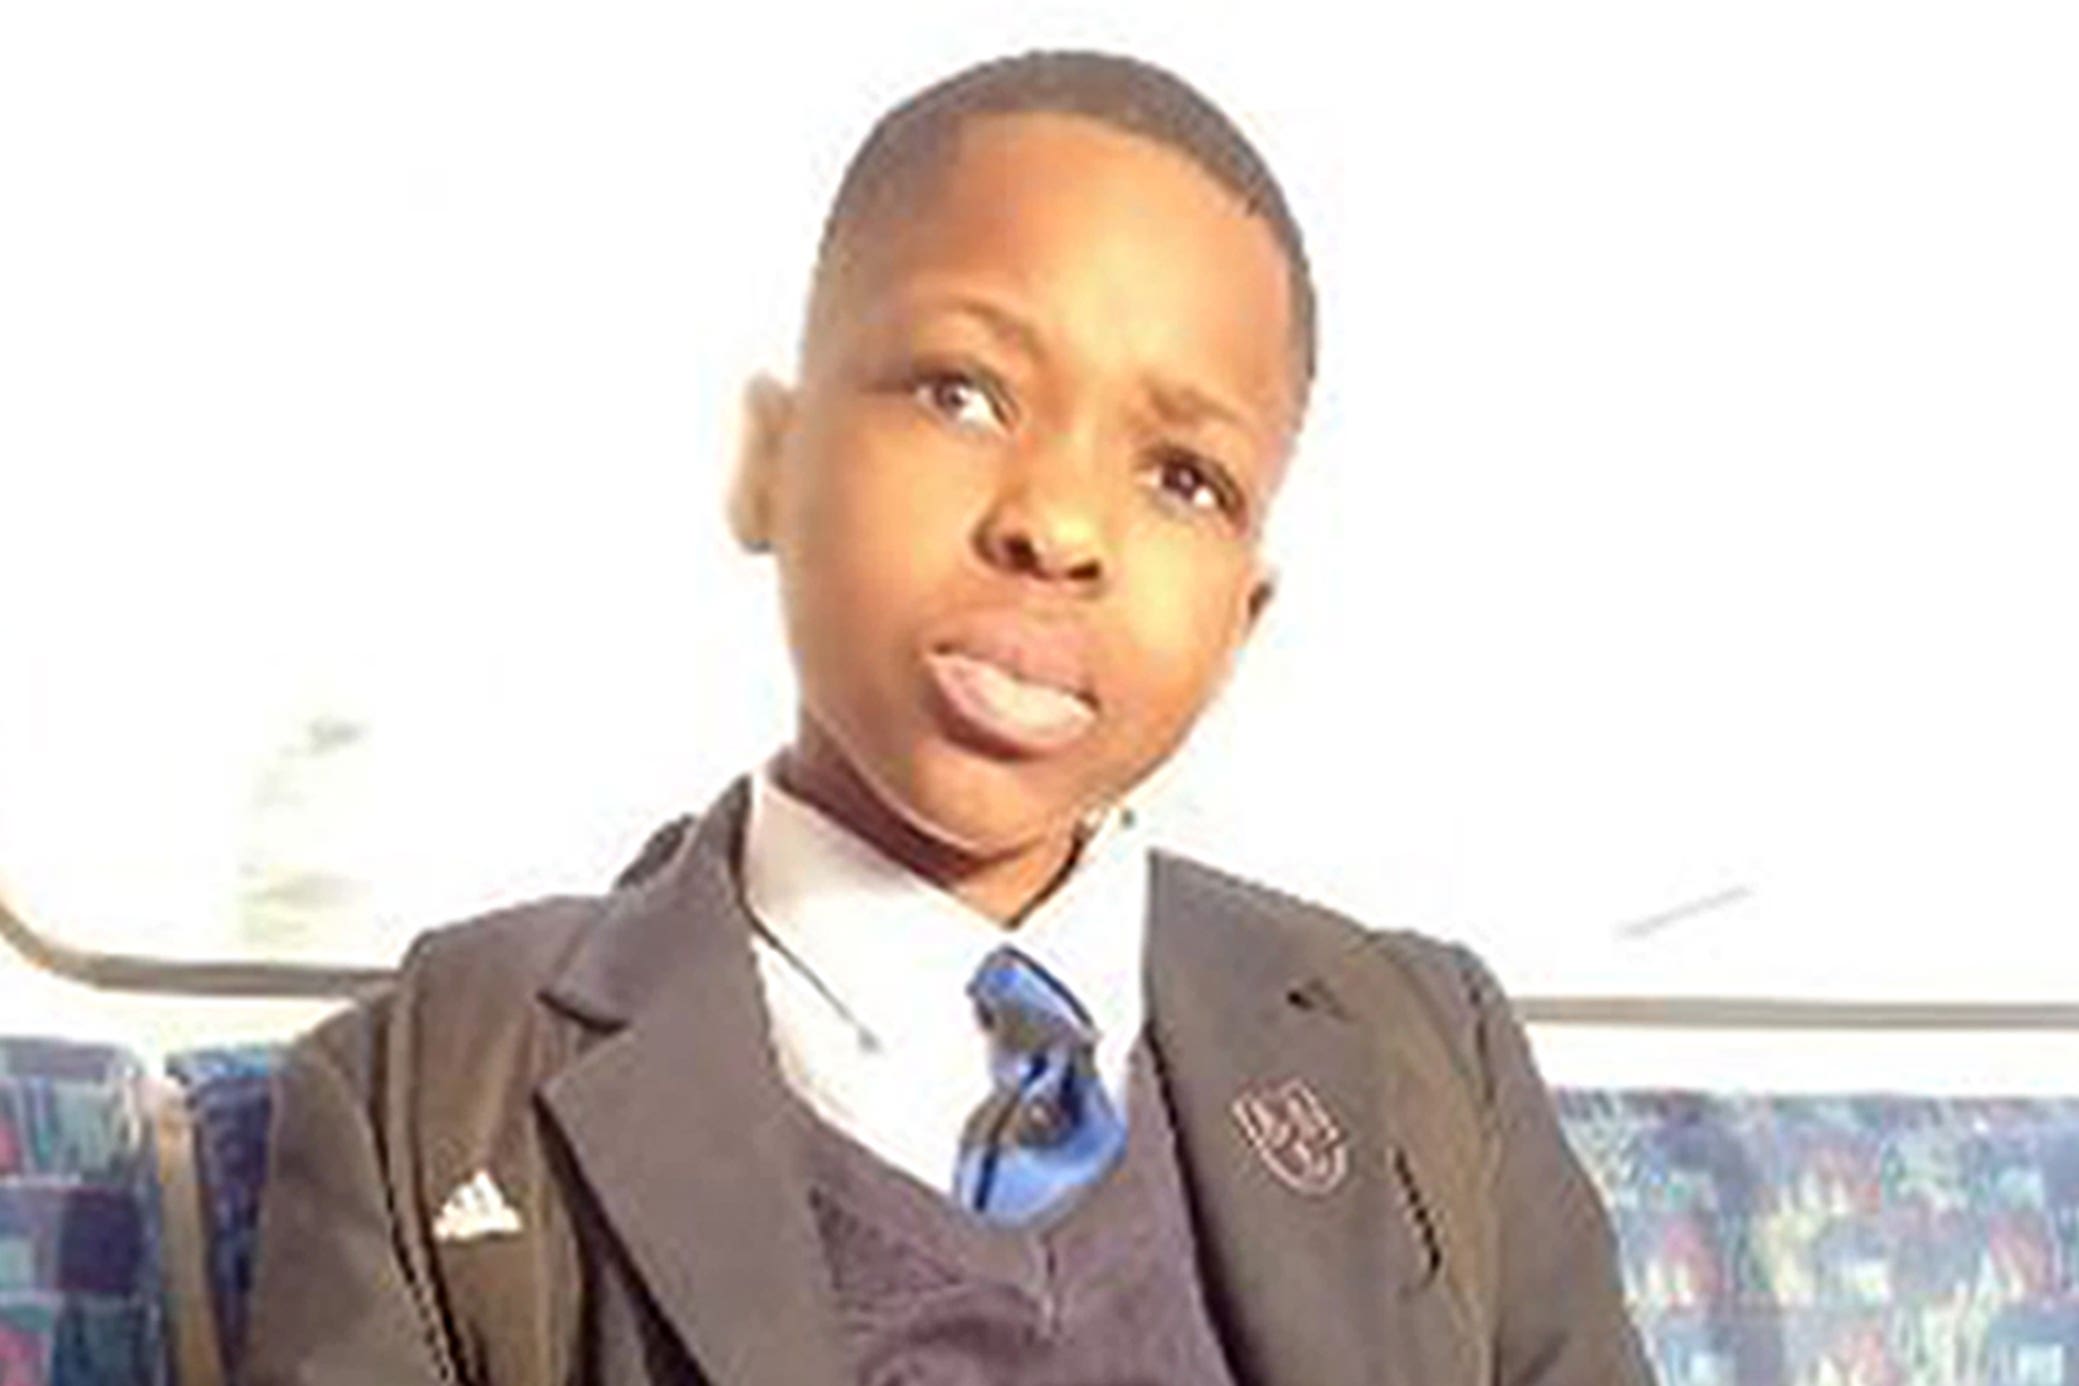 Daniel Anjorin was killed in a sword attack in Hainault, east London, last month